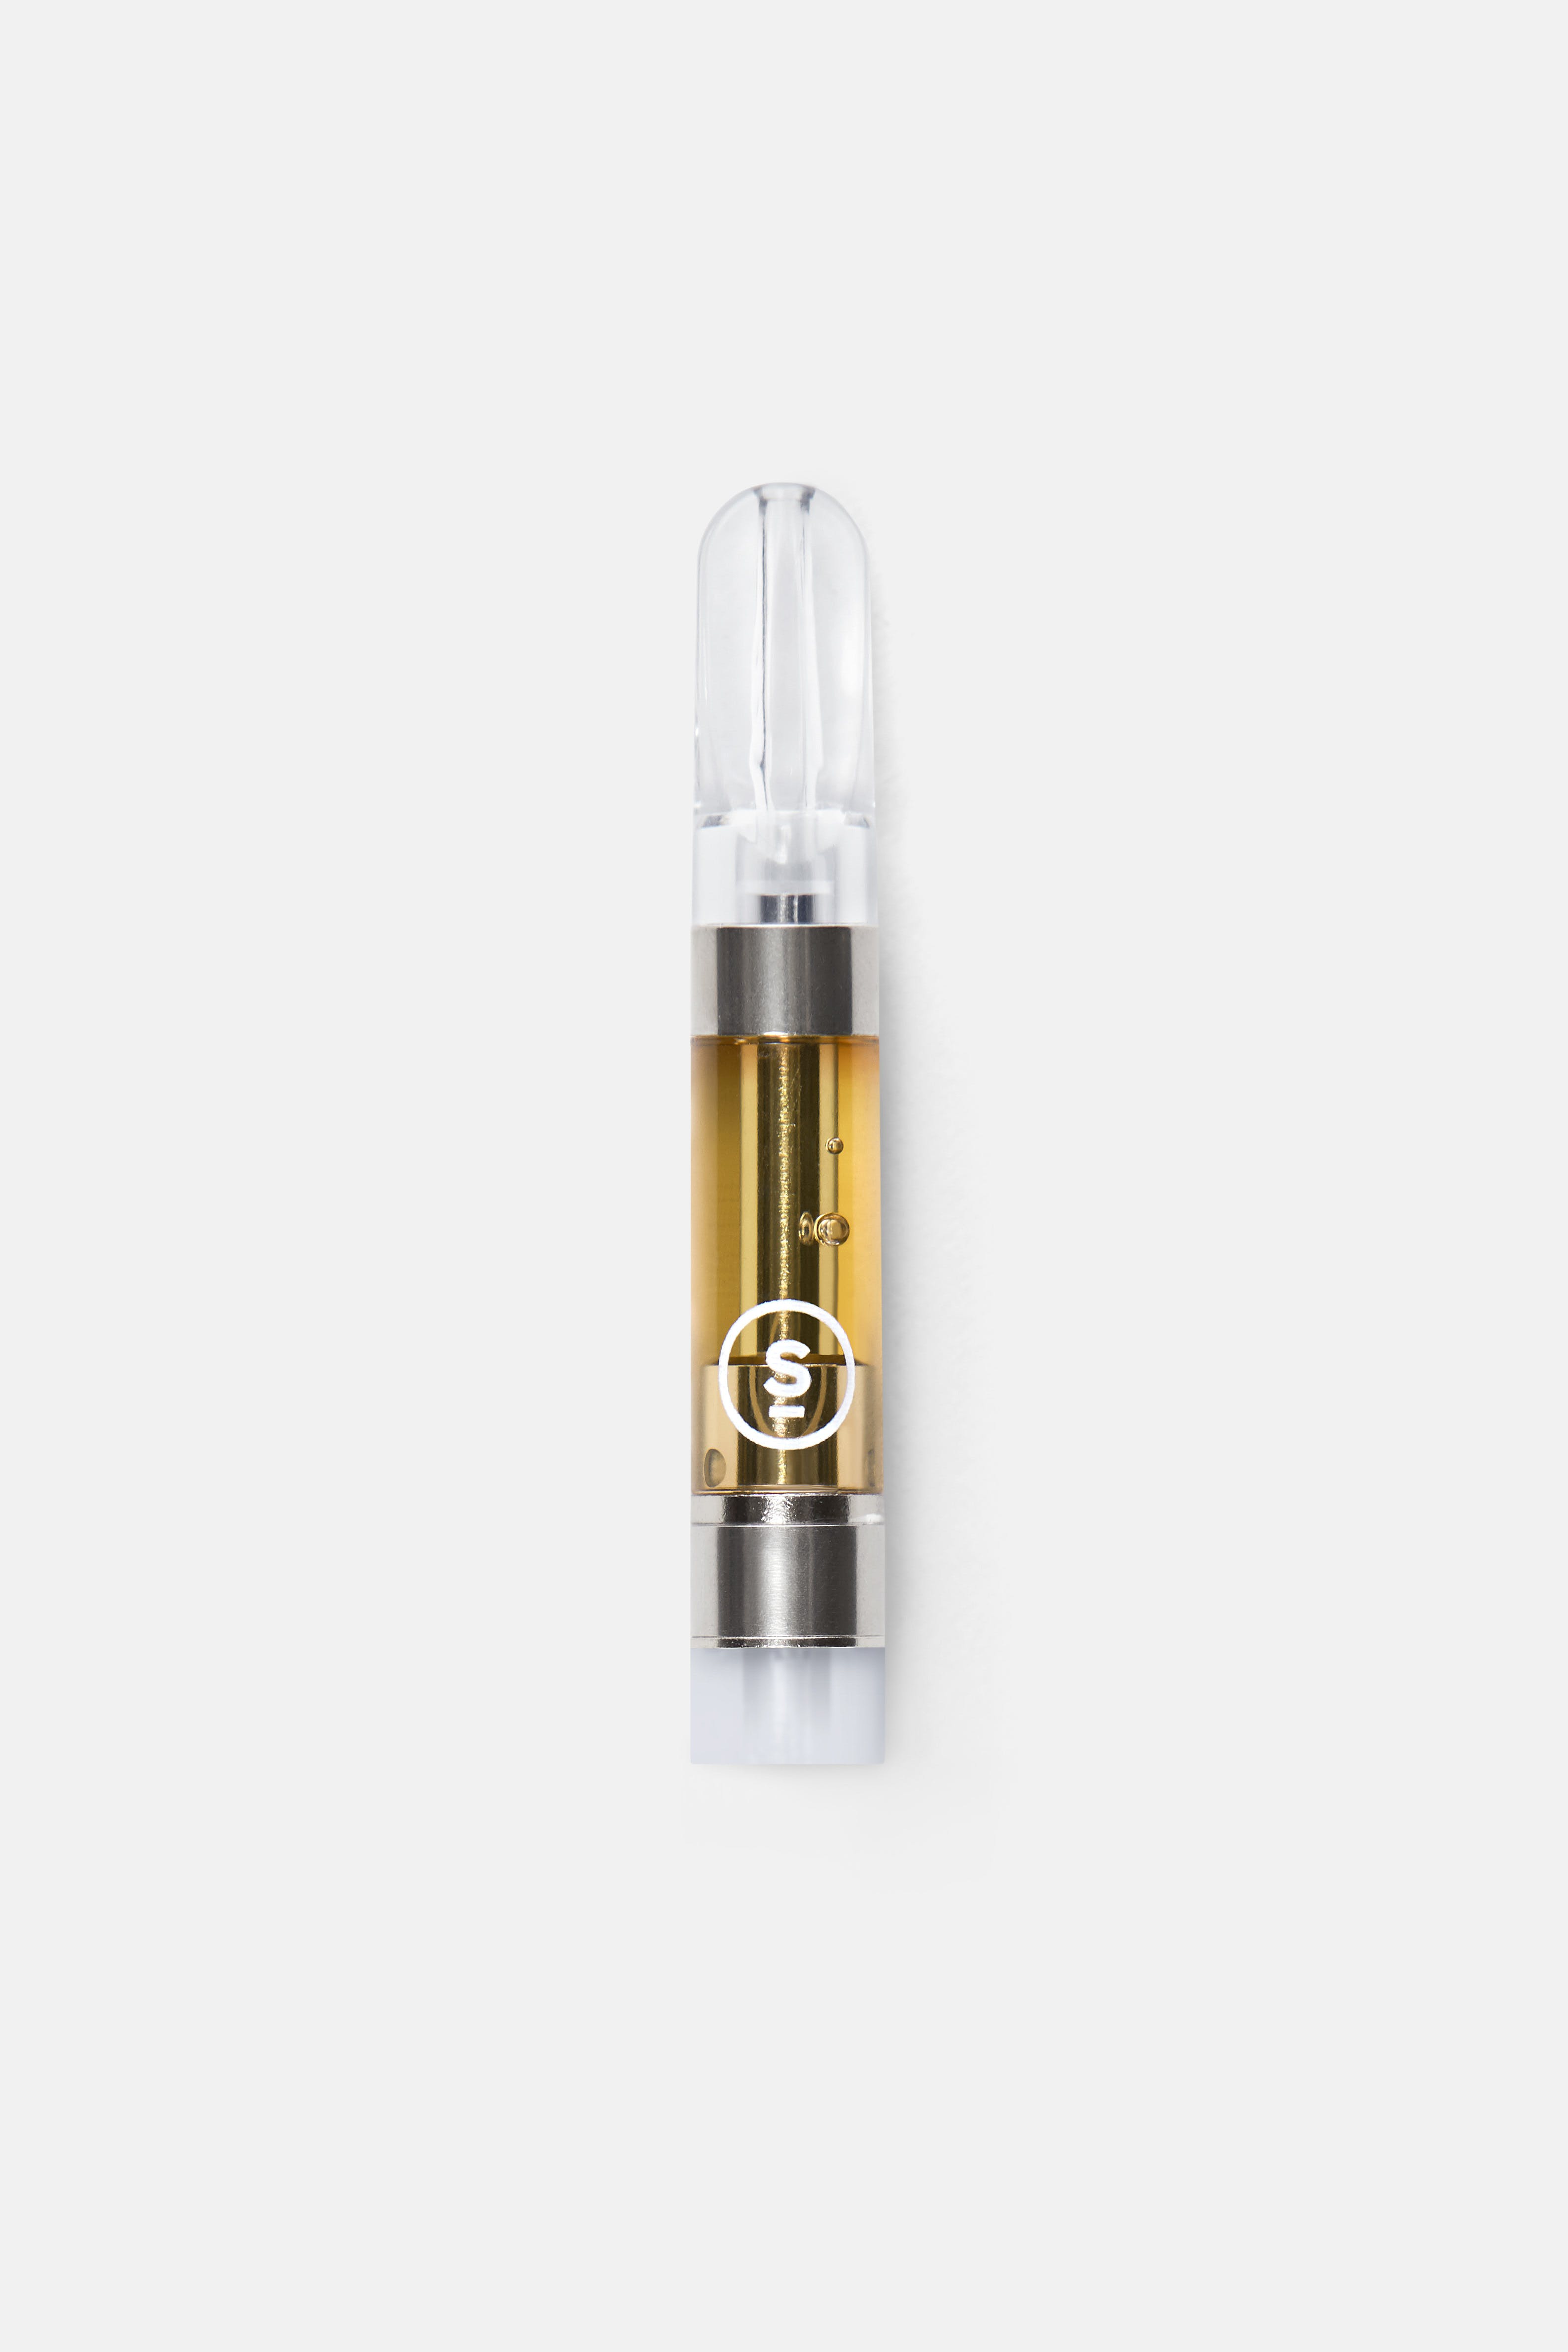 concentrate-cherry-pie-select-vapes-500mg